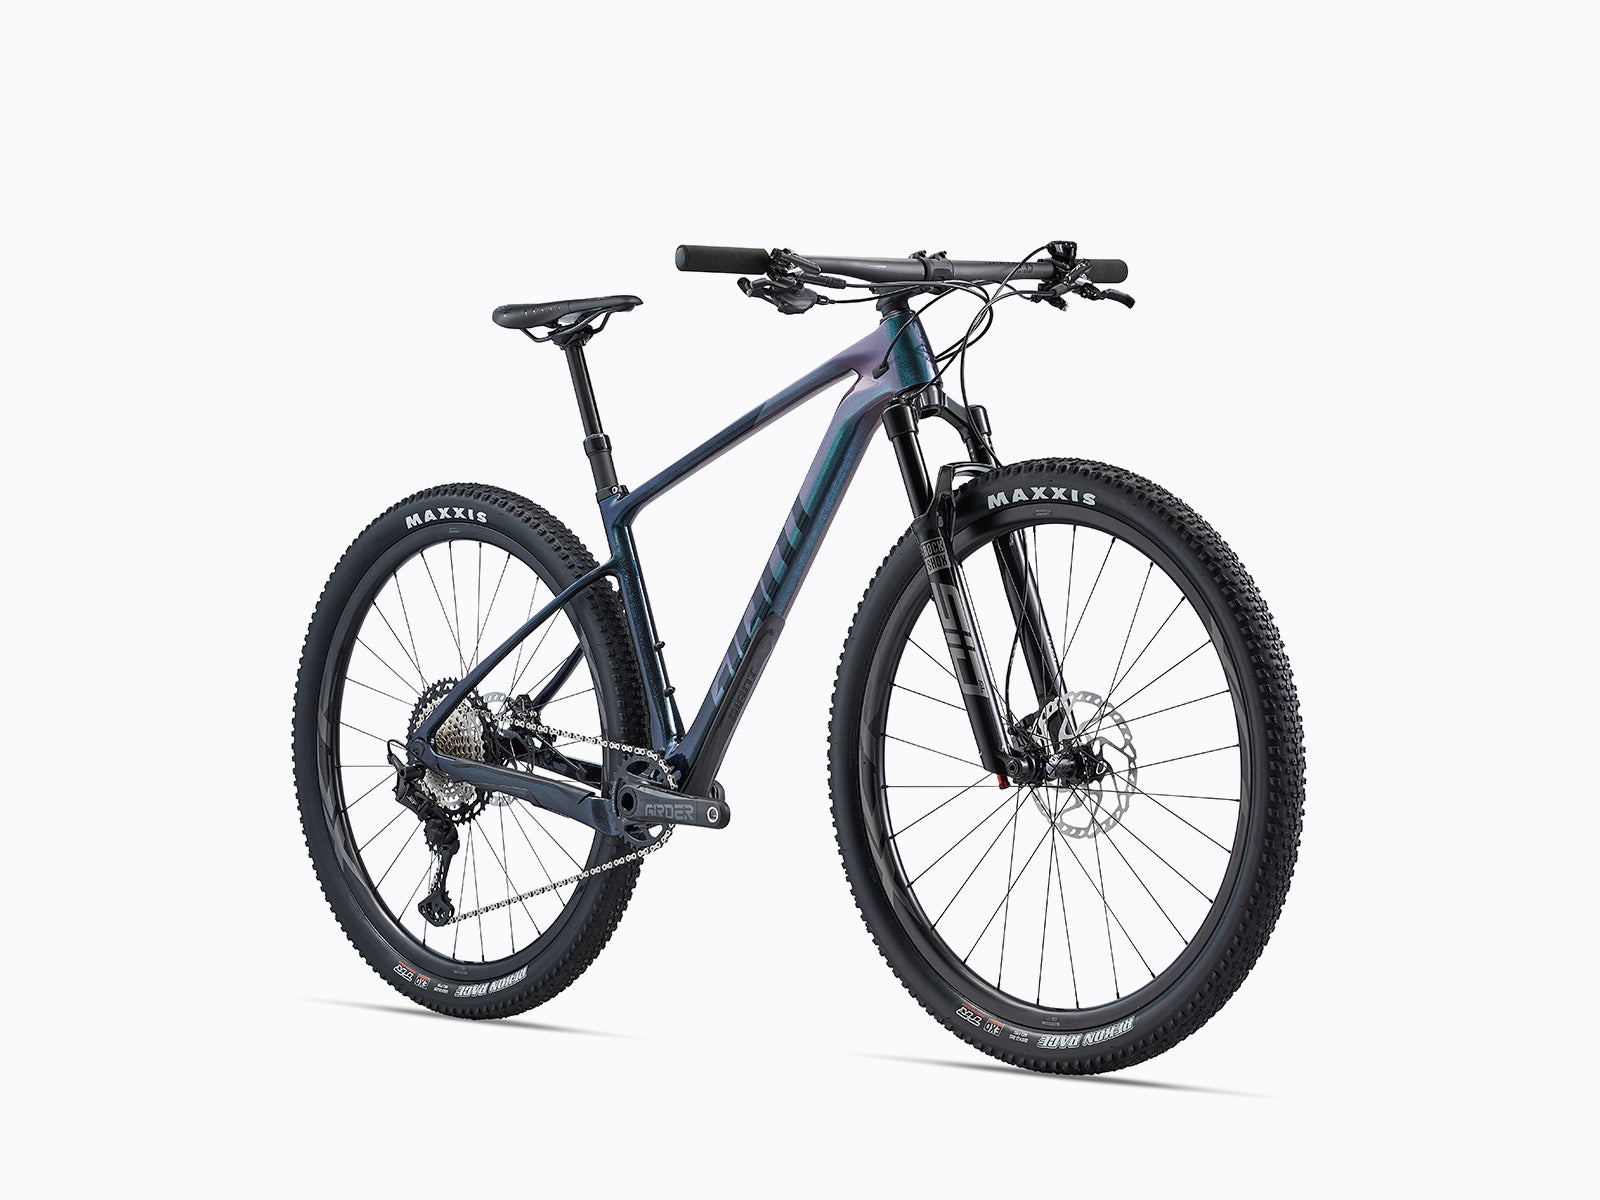  image features a Giant Xtc Advanced SL 29 a mountain bike for cross country riding, now available at Giant Melbourne, a bike shop in Australia